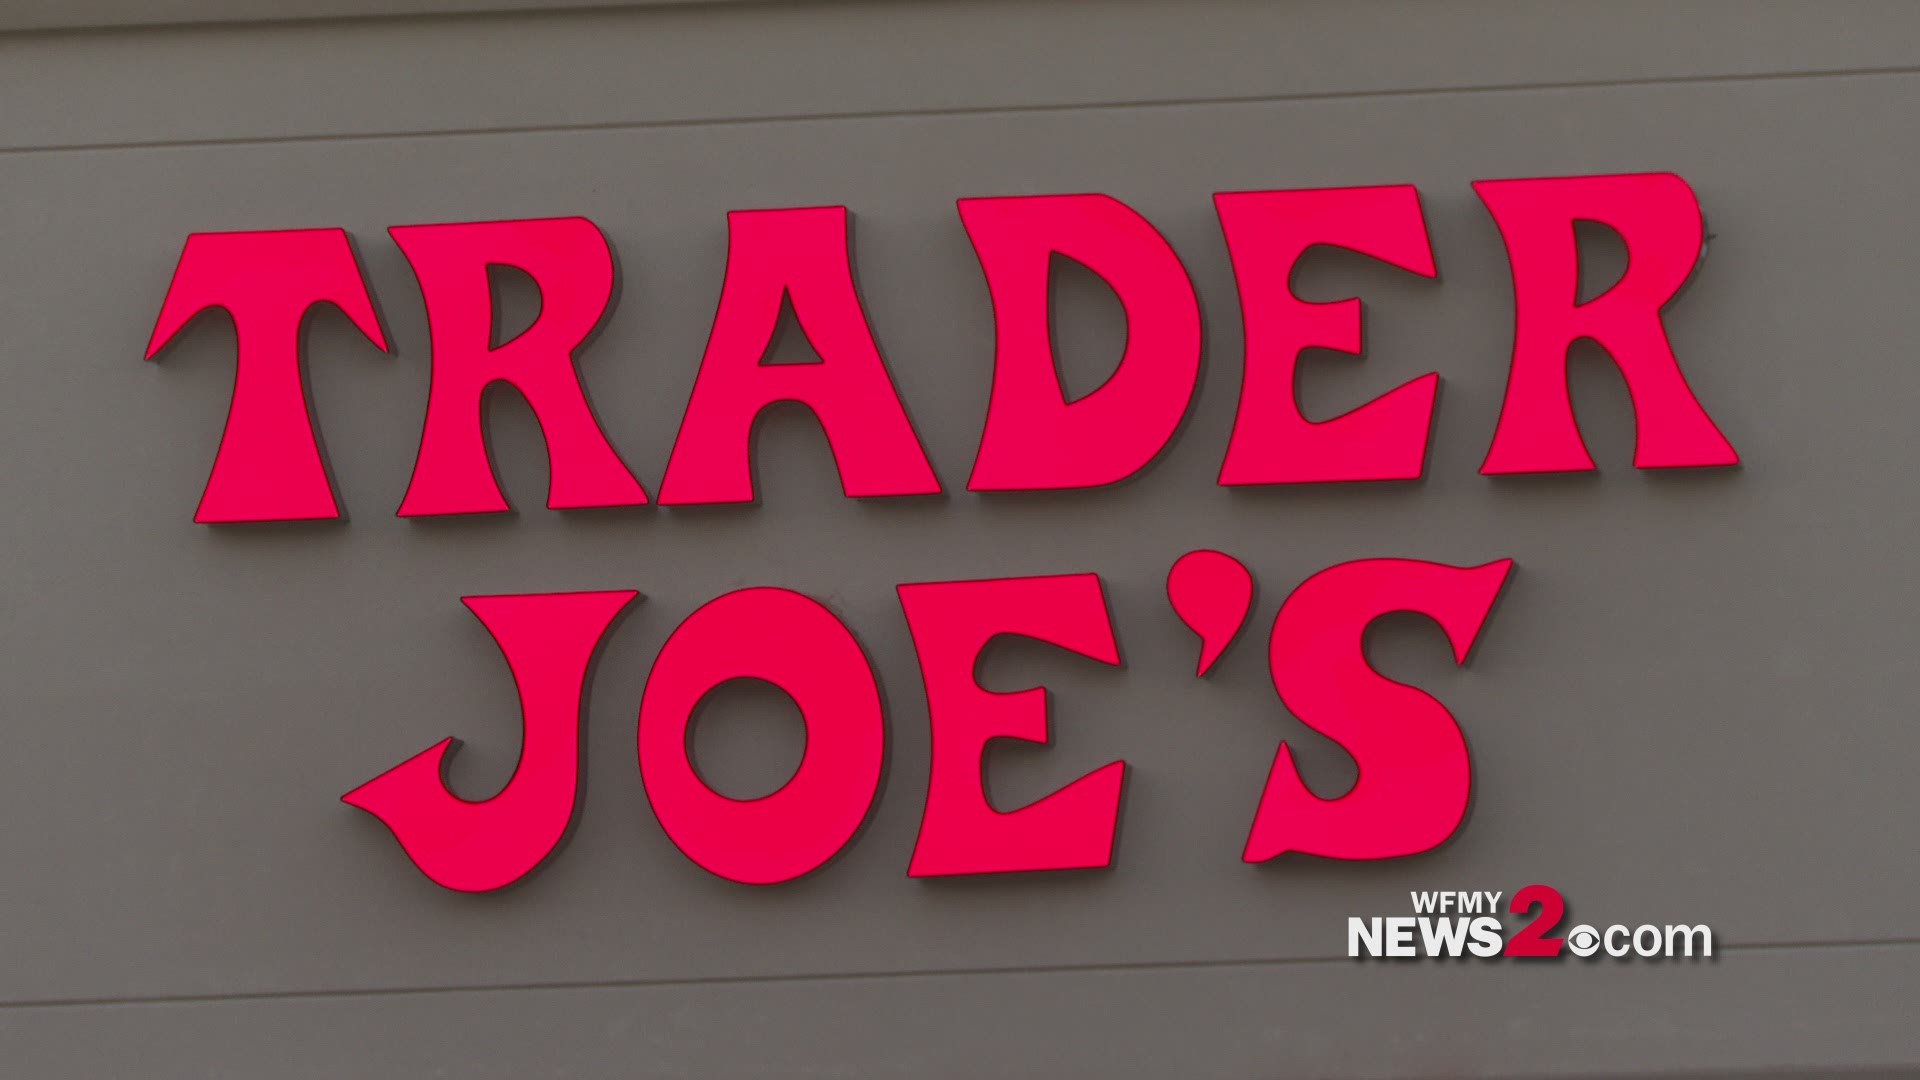 After months of anticipation, Greensboro's Trader Joe's location will open on Thursday. October 24th.